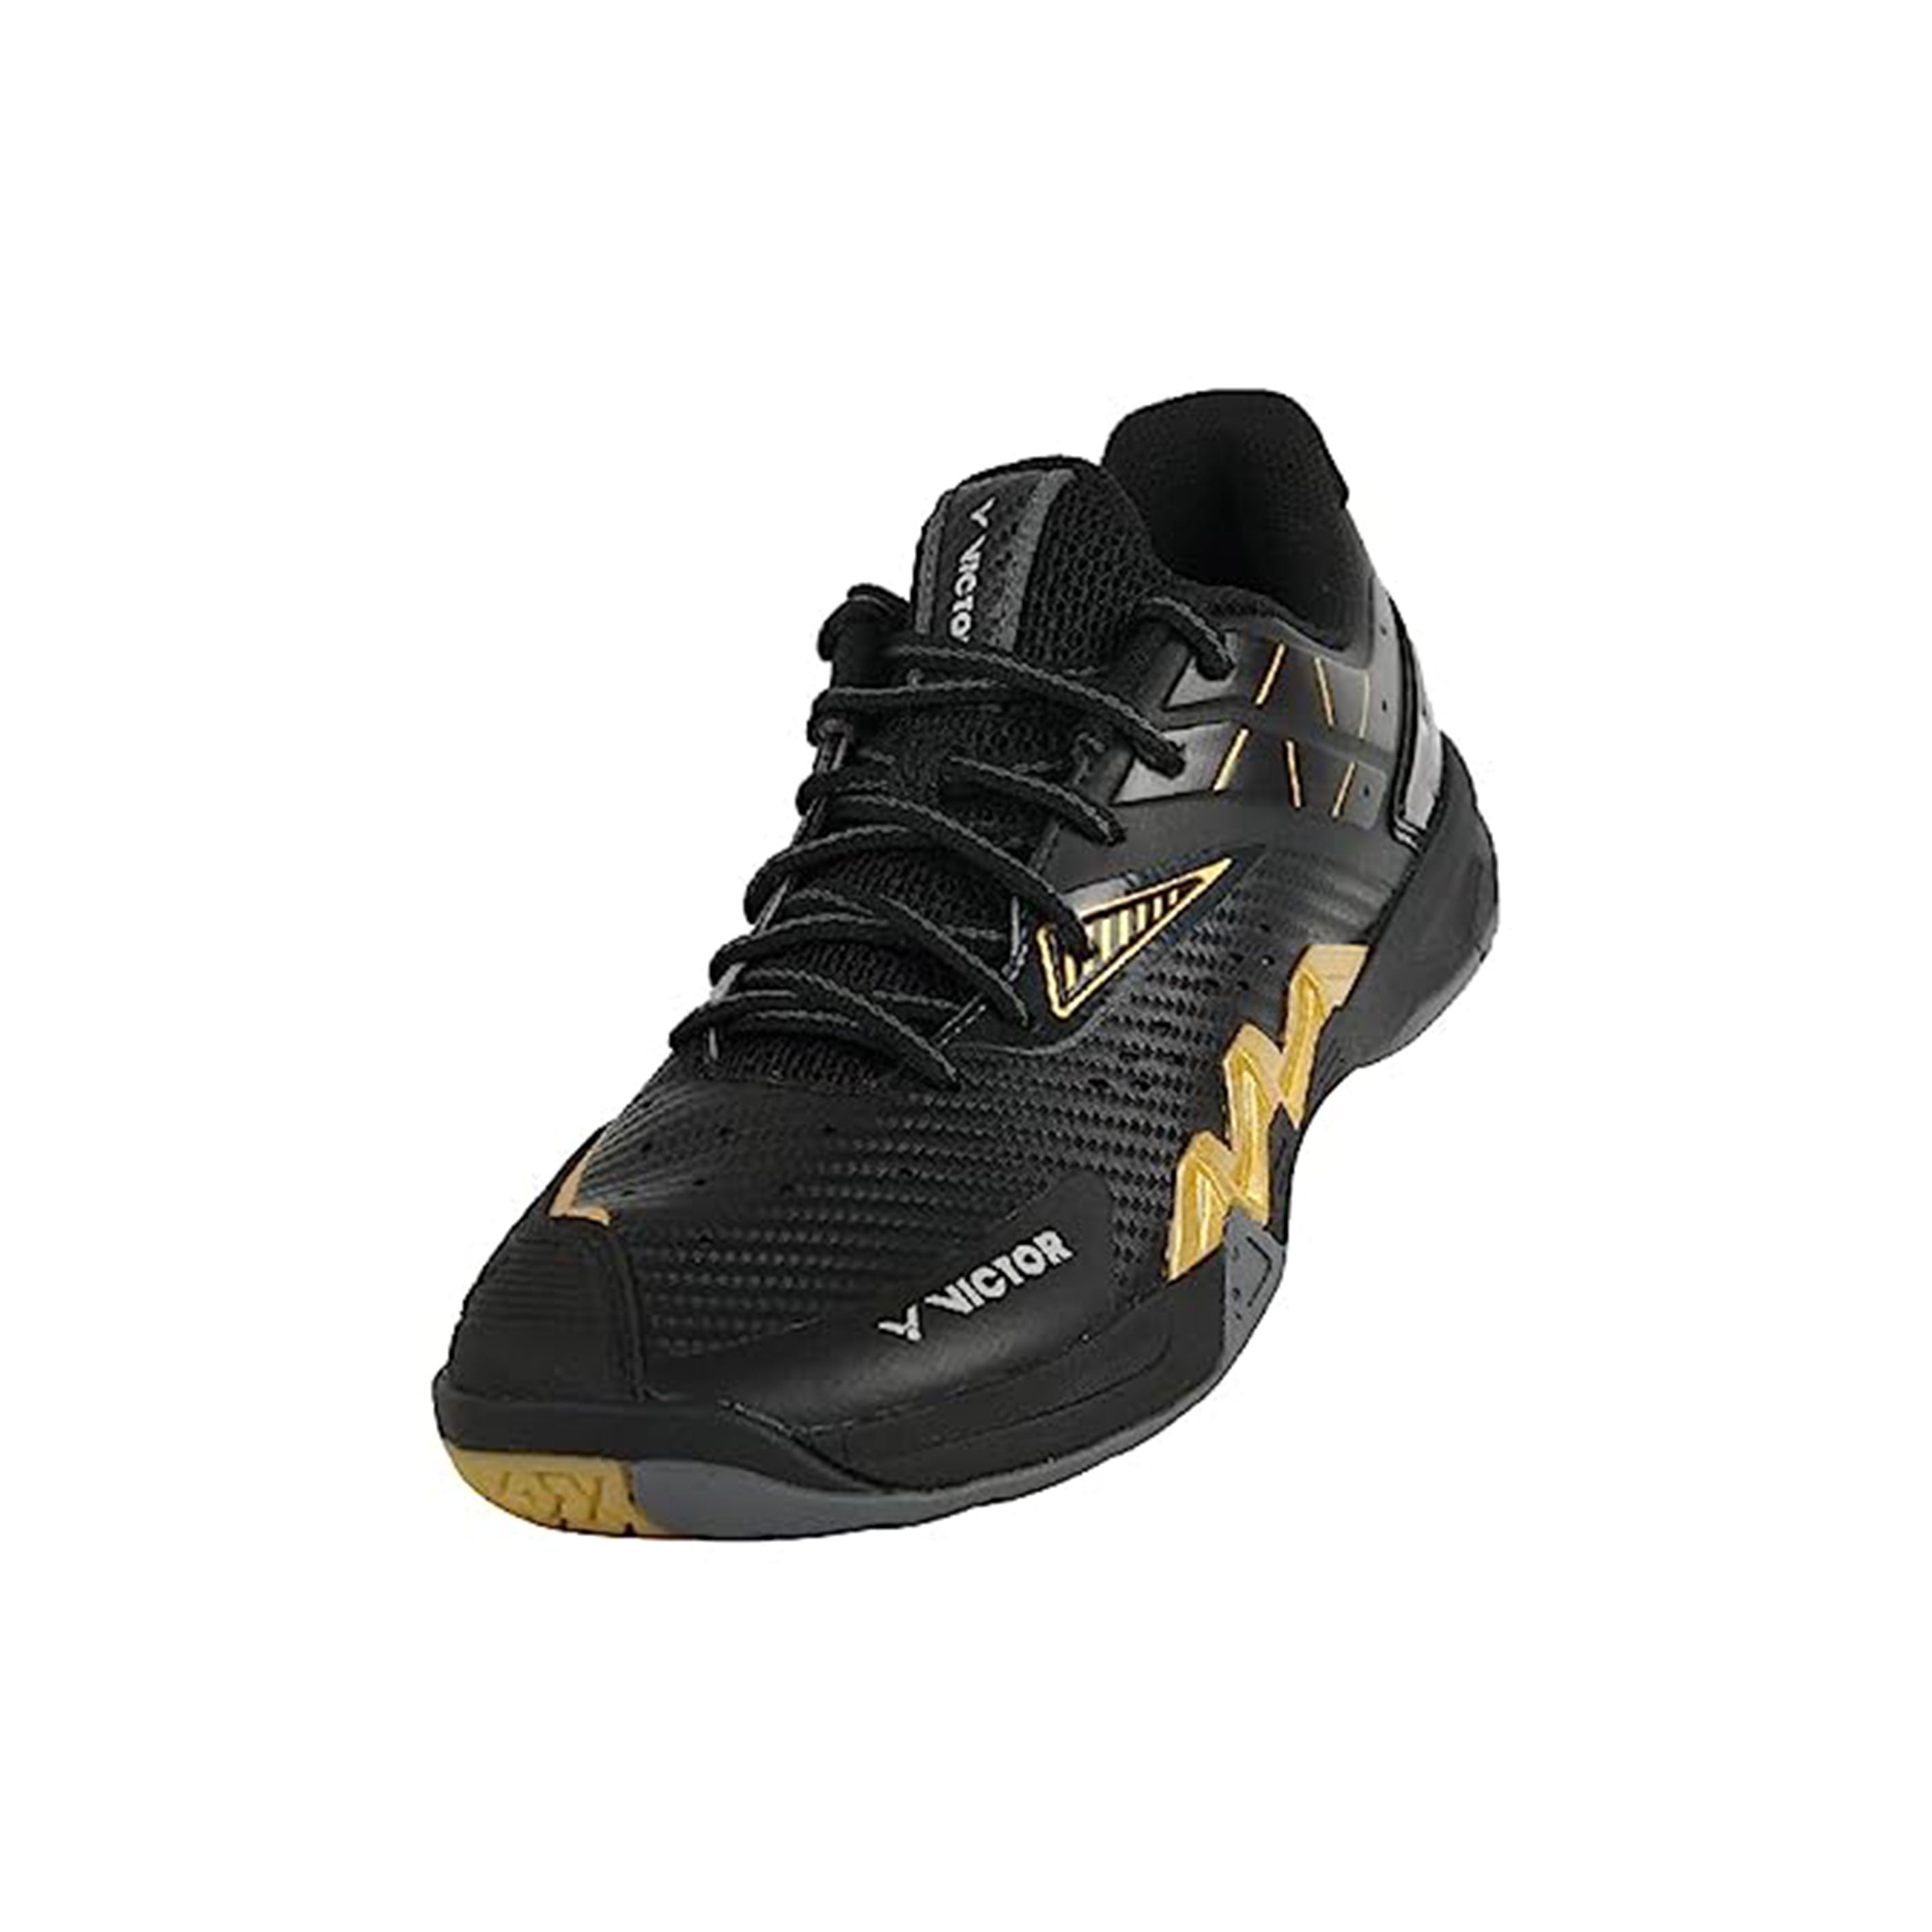 P8500II-C Support Series Professional Badminton Shoes